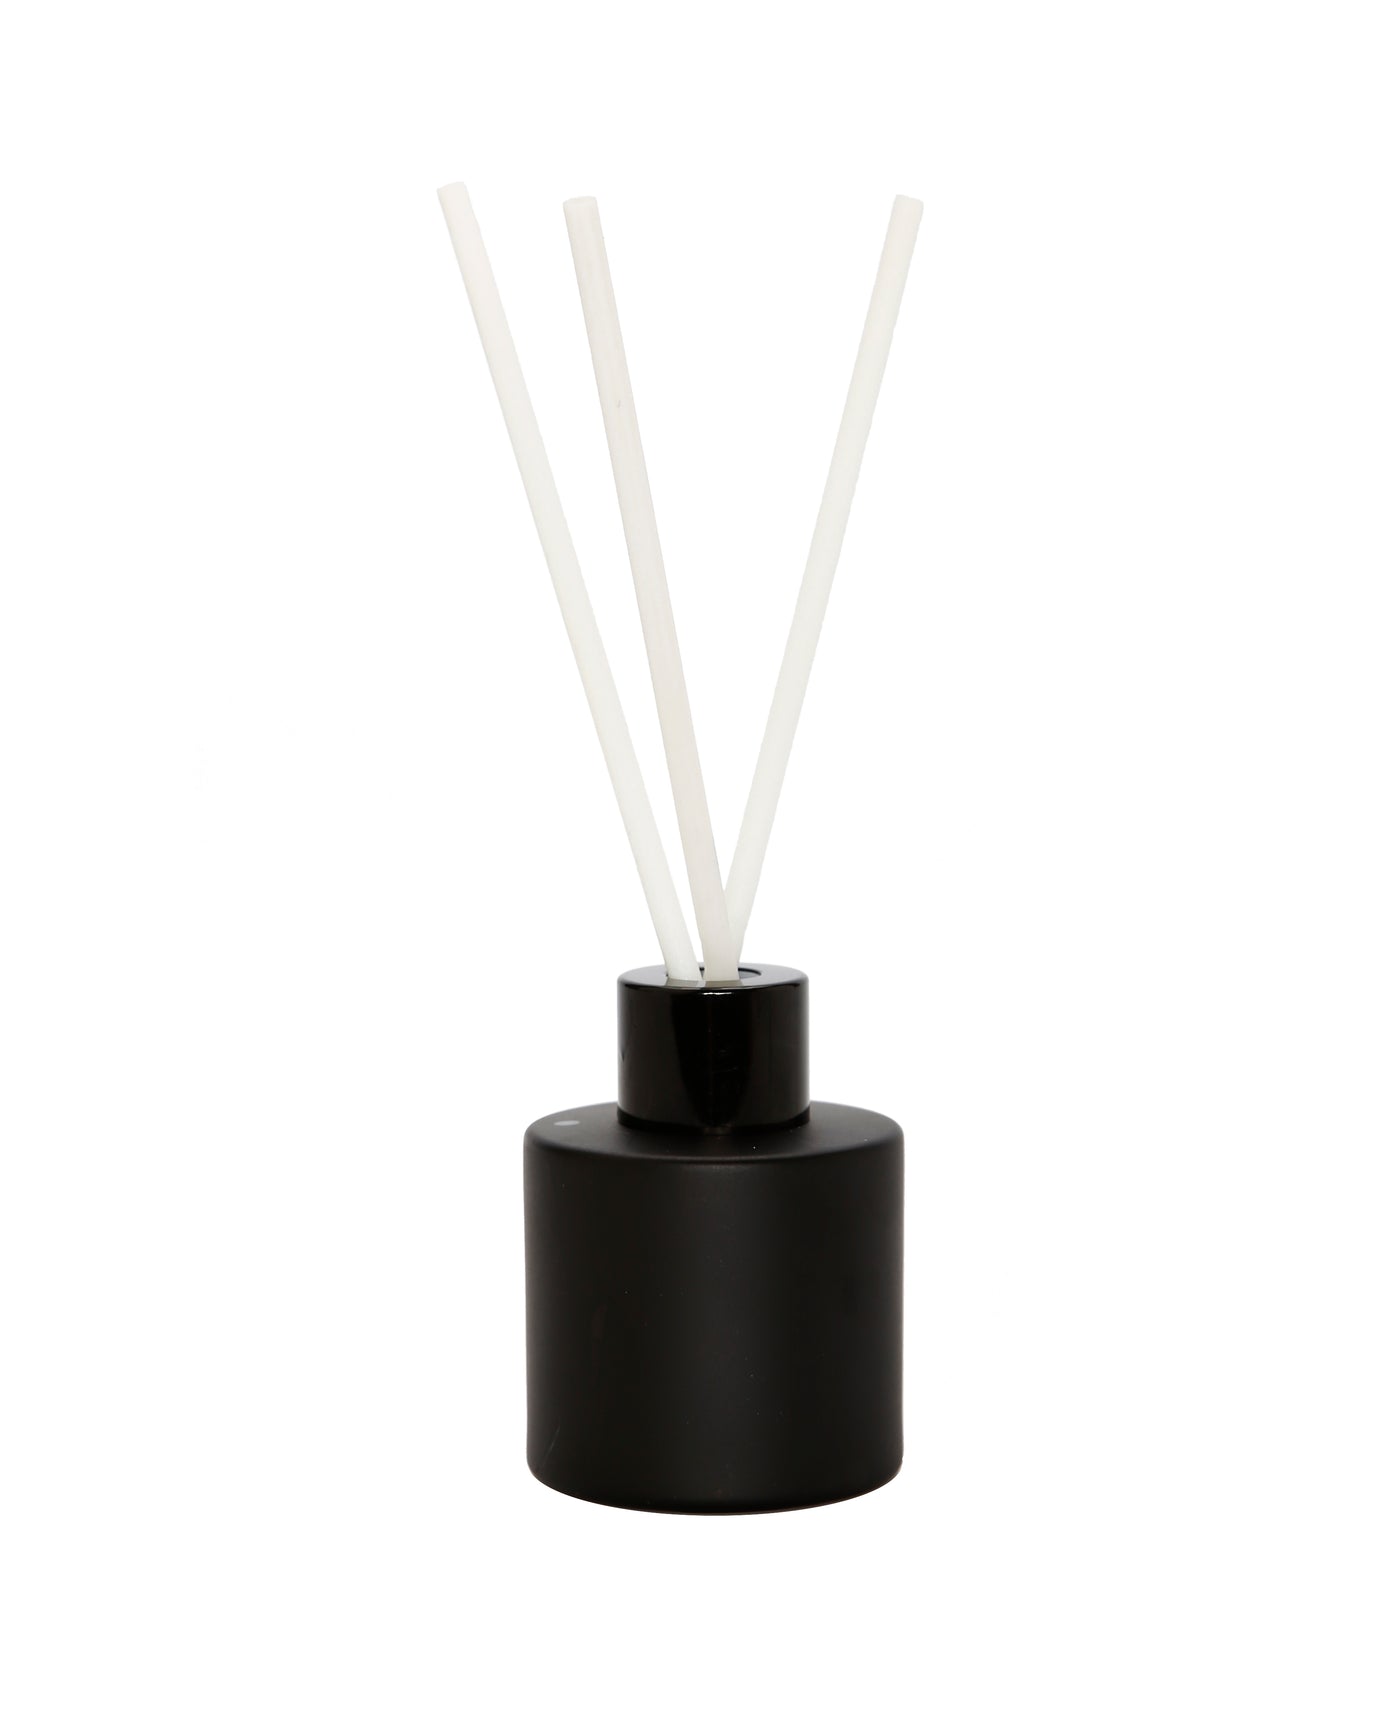 Set of 3 Diffusers-Assorted Scents/colors